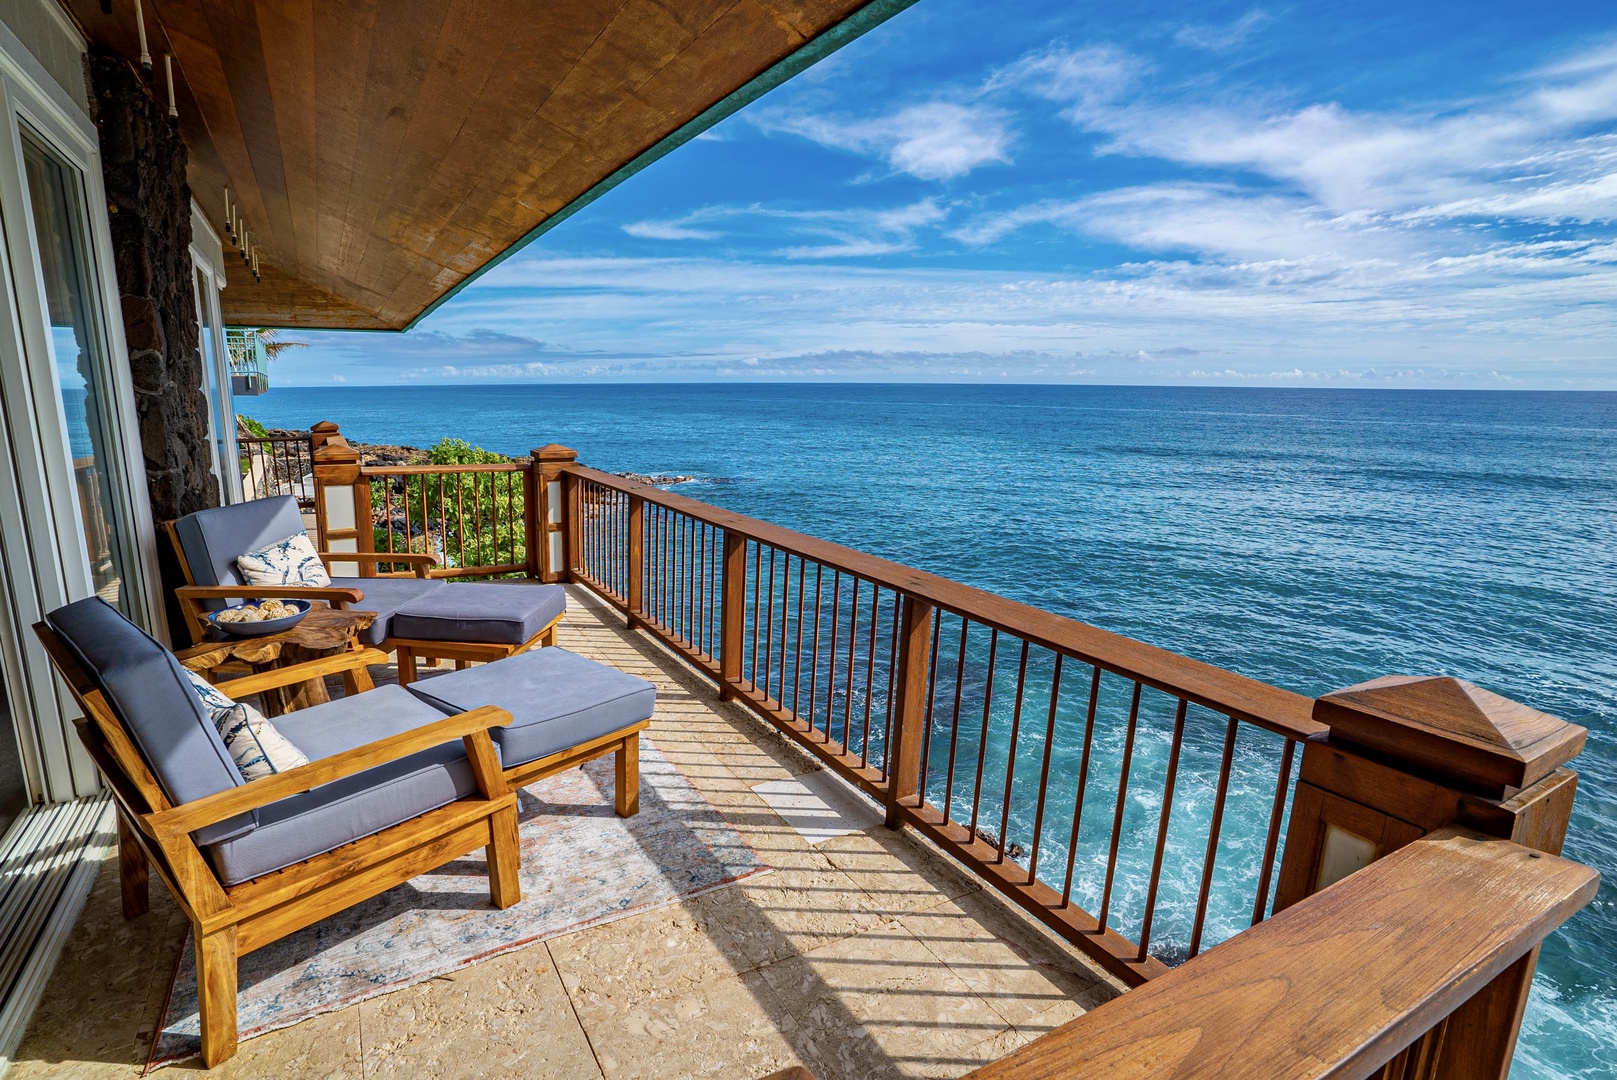 Honolulu Vacation Rentals, Kaiko'o Villa** - It's like being on a boat minus the motion